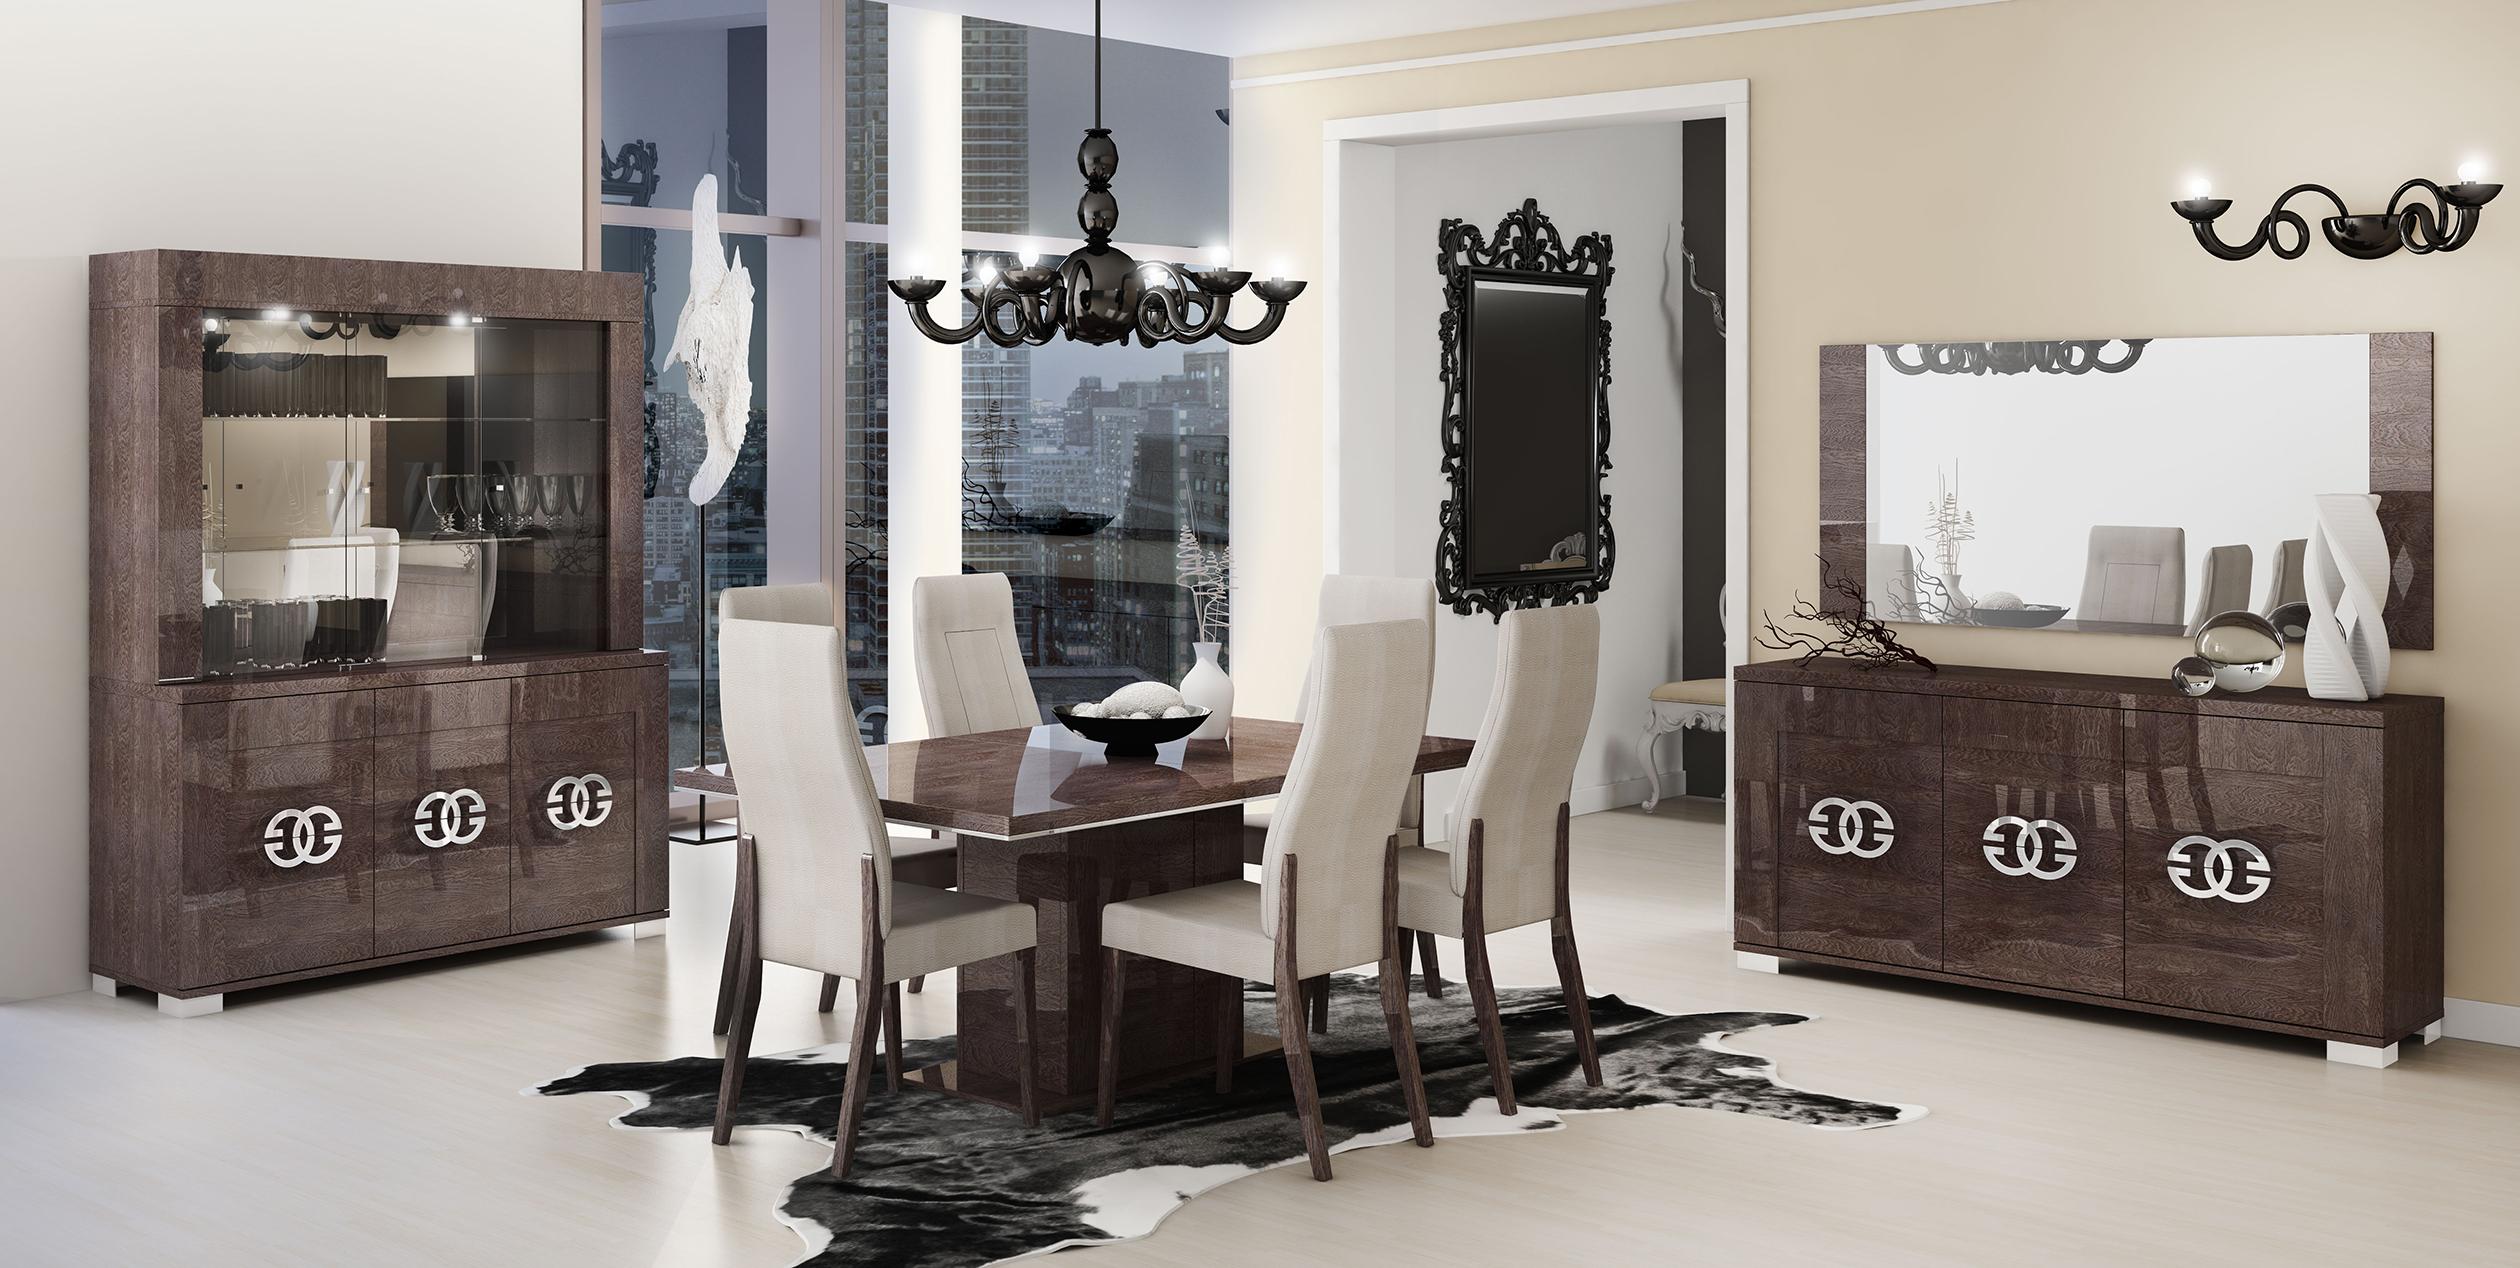 

    
PRESTIGETABLE-5PC High Gloss Wenge Dining Table Set 5Pcs Contemporary Made in Italy ESF Prestige
